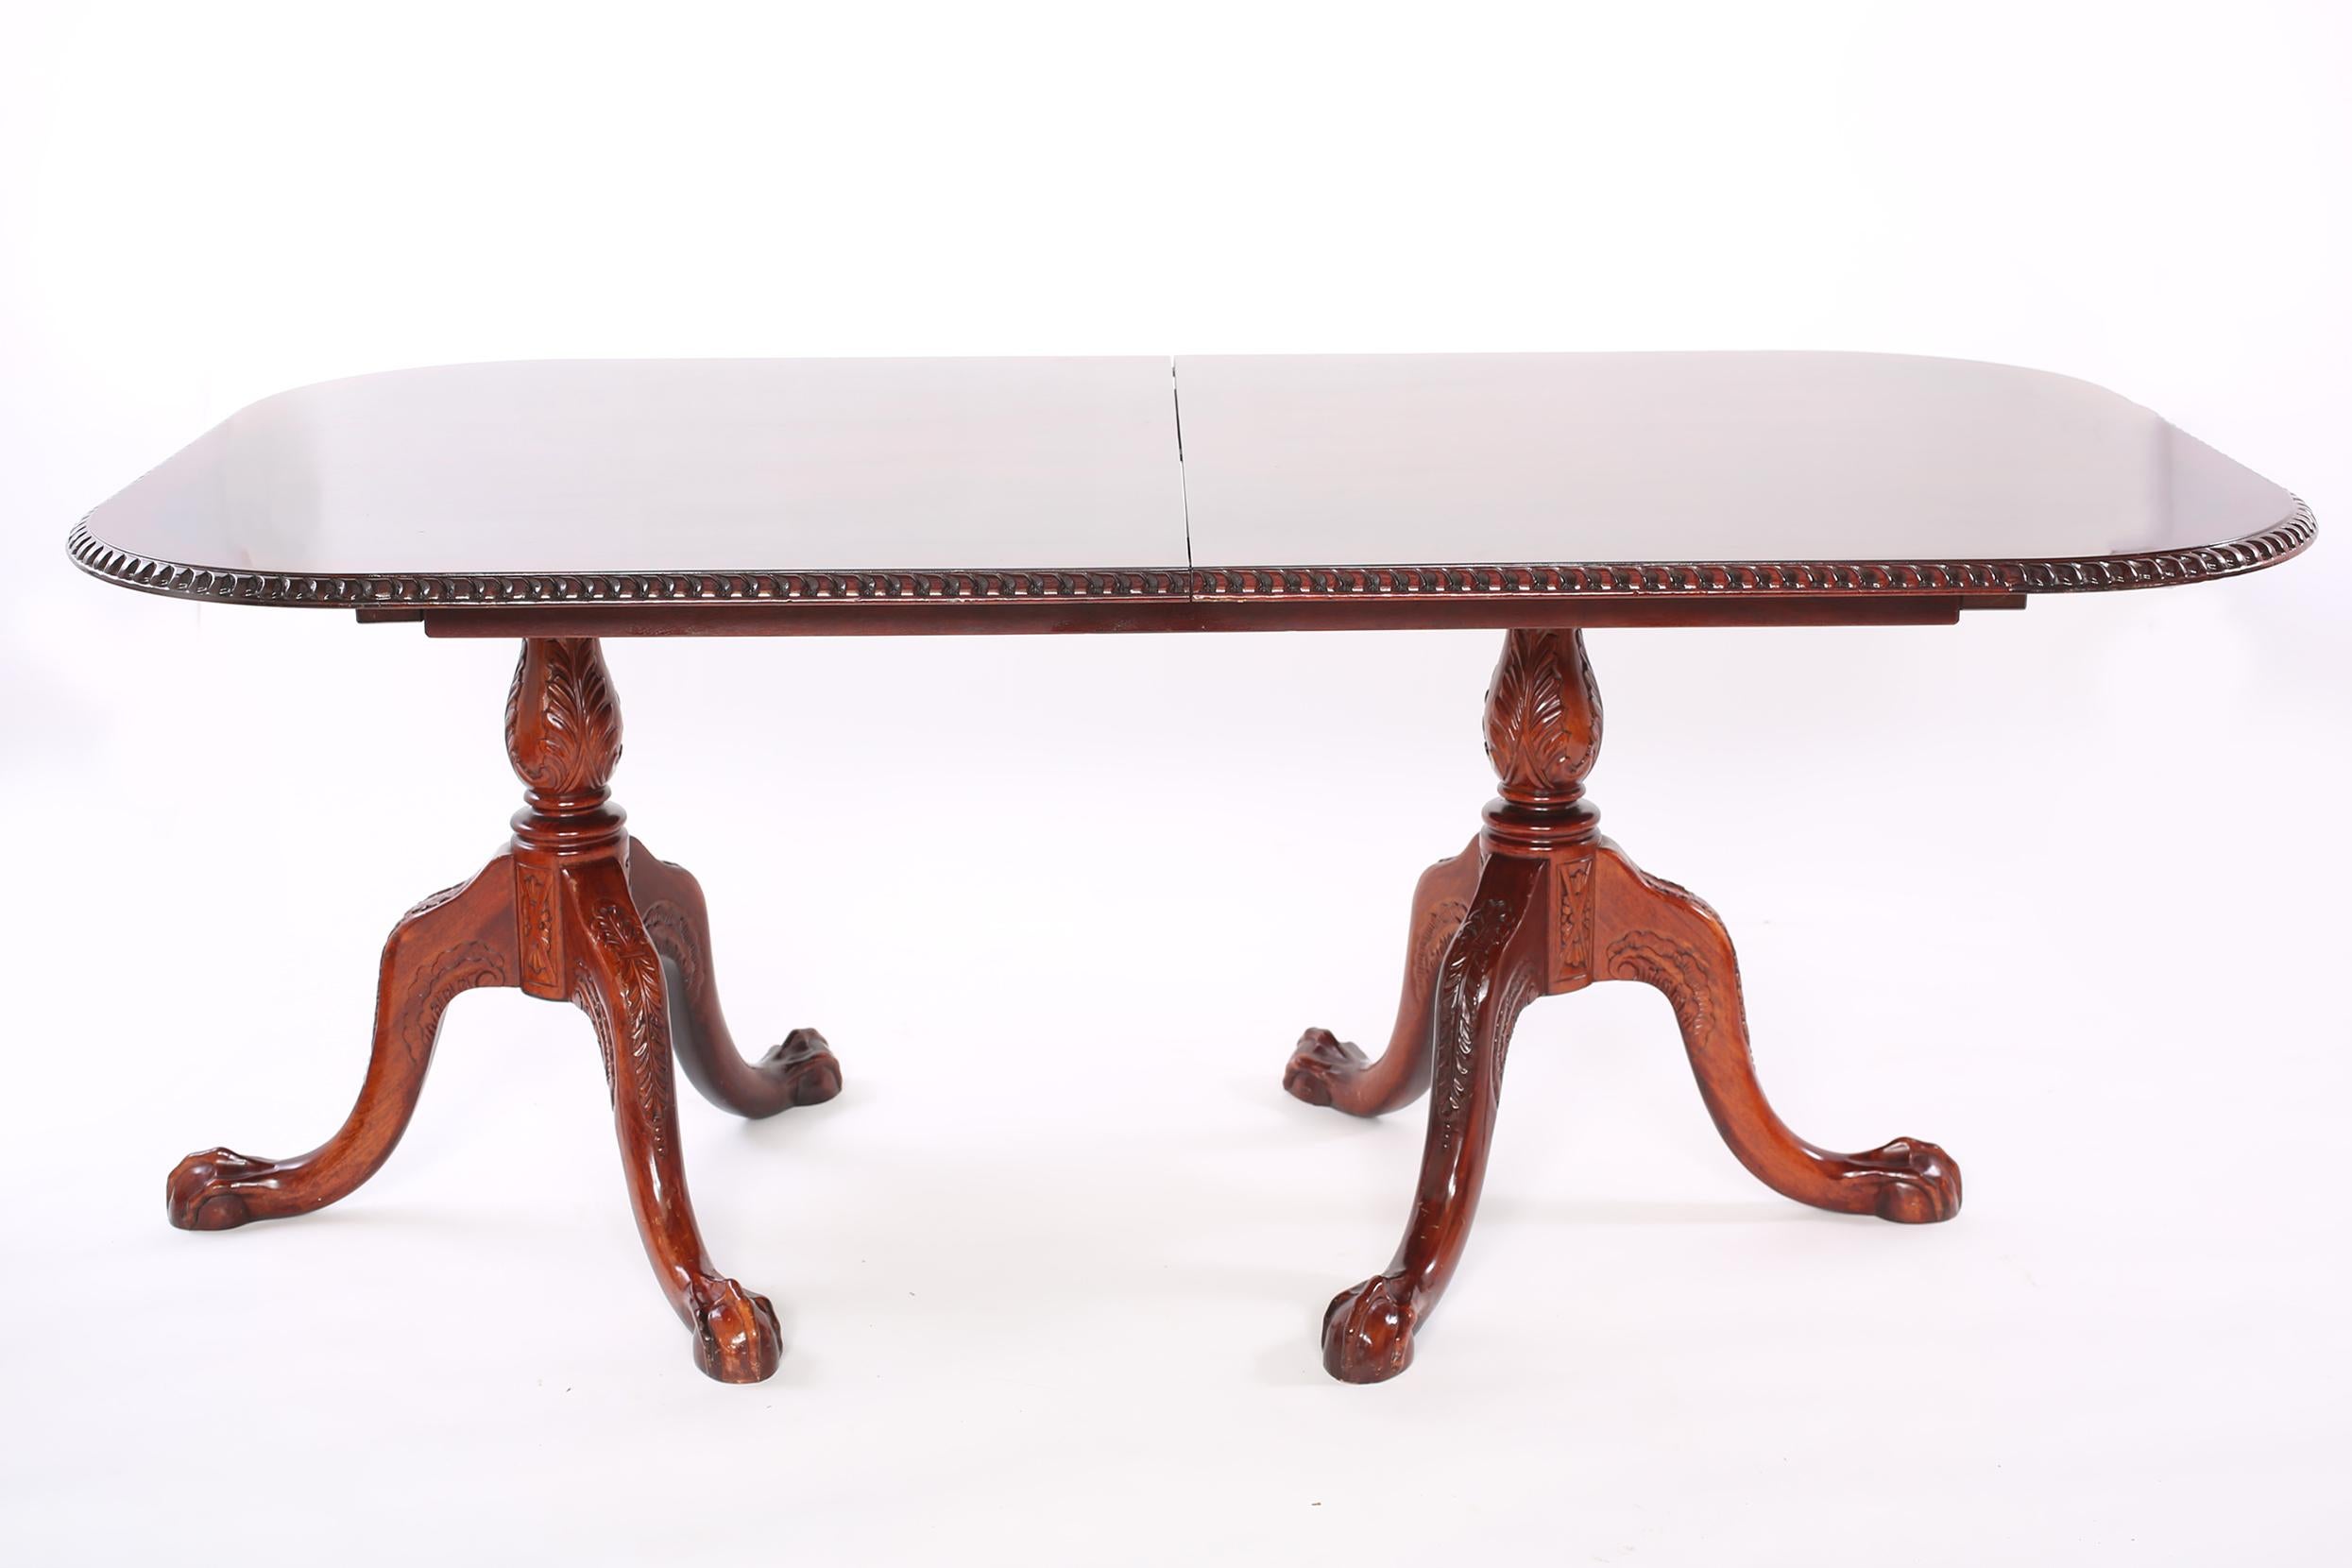 Beautifully crafted American-Centennial Queen Anne style dining table in mahogany wood. The dining table comes with two leaves and can seats up eight people when it's fully extended. The table is in great condition. Closed the table stand about 29